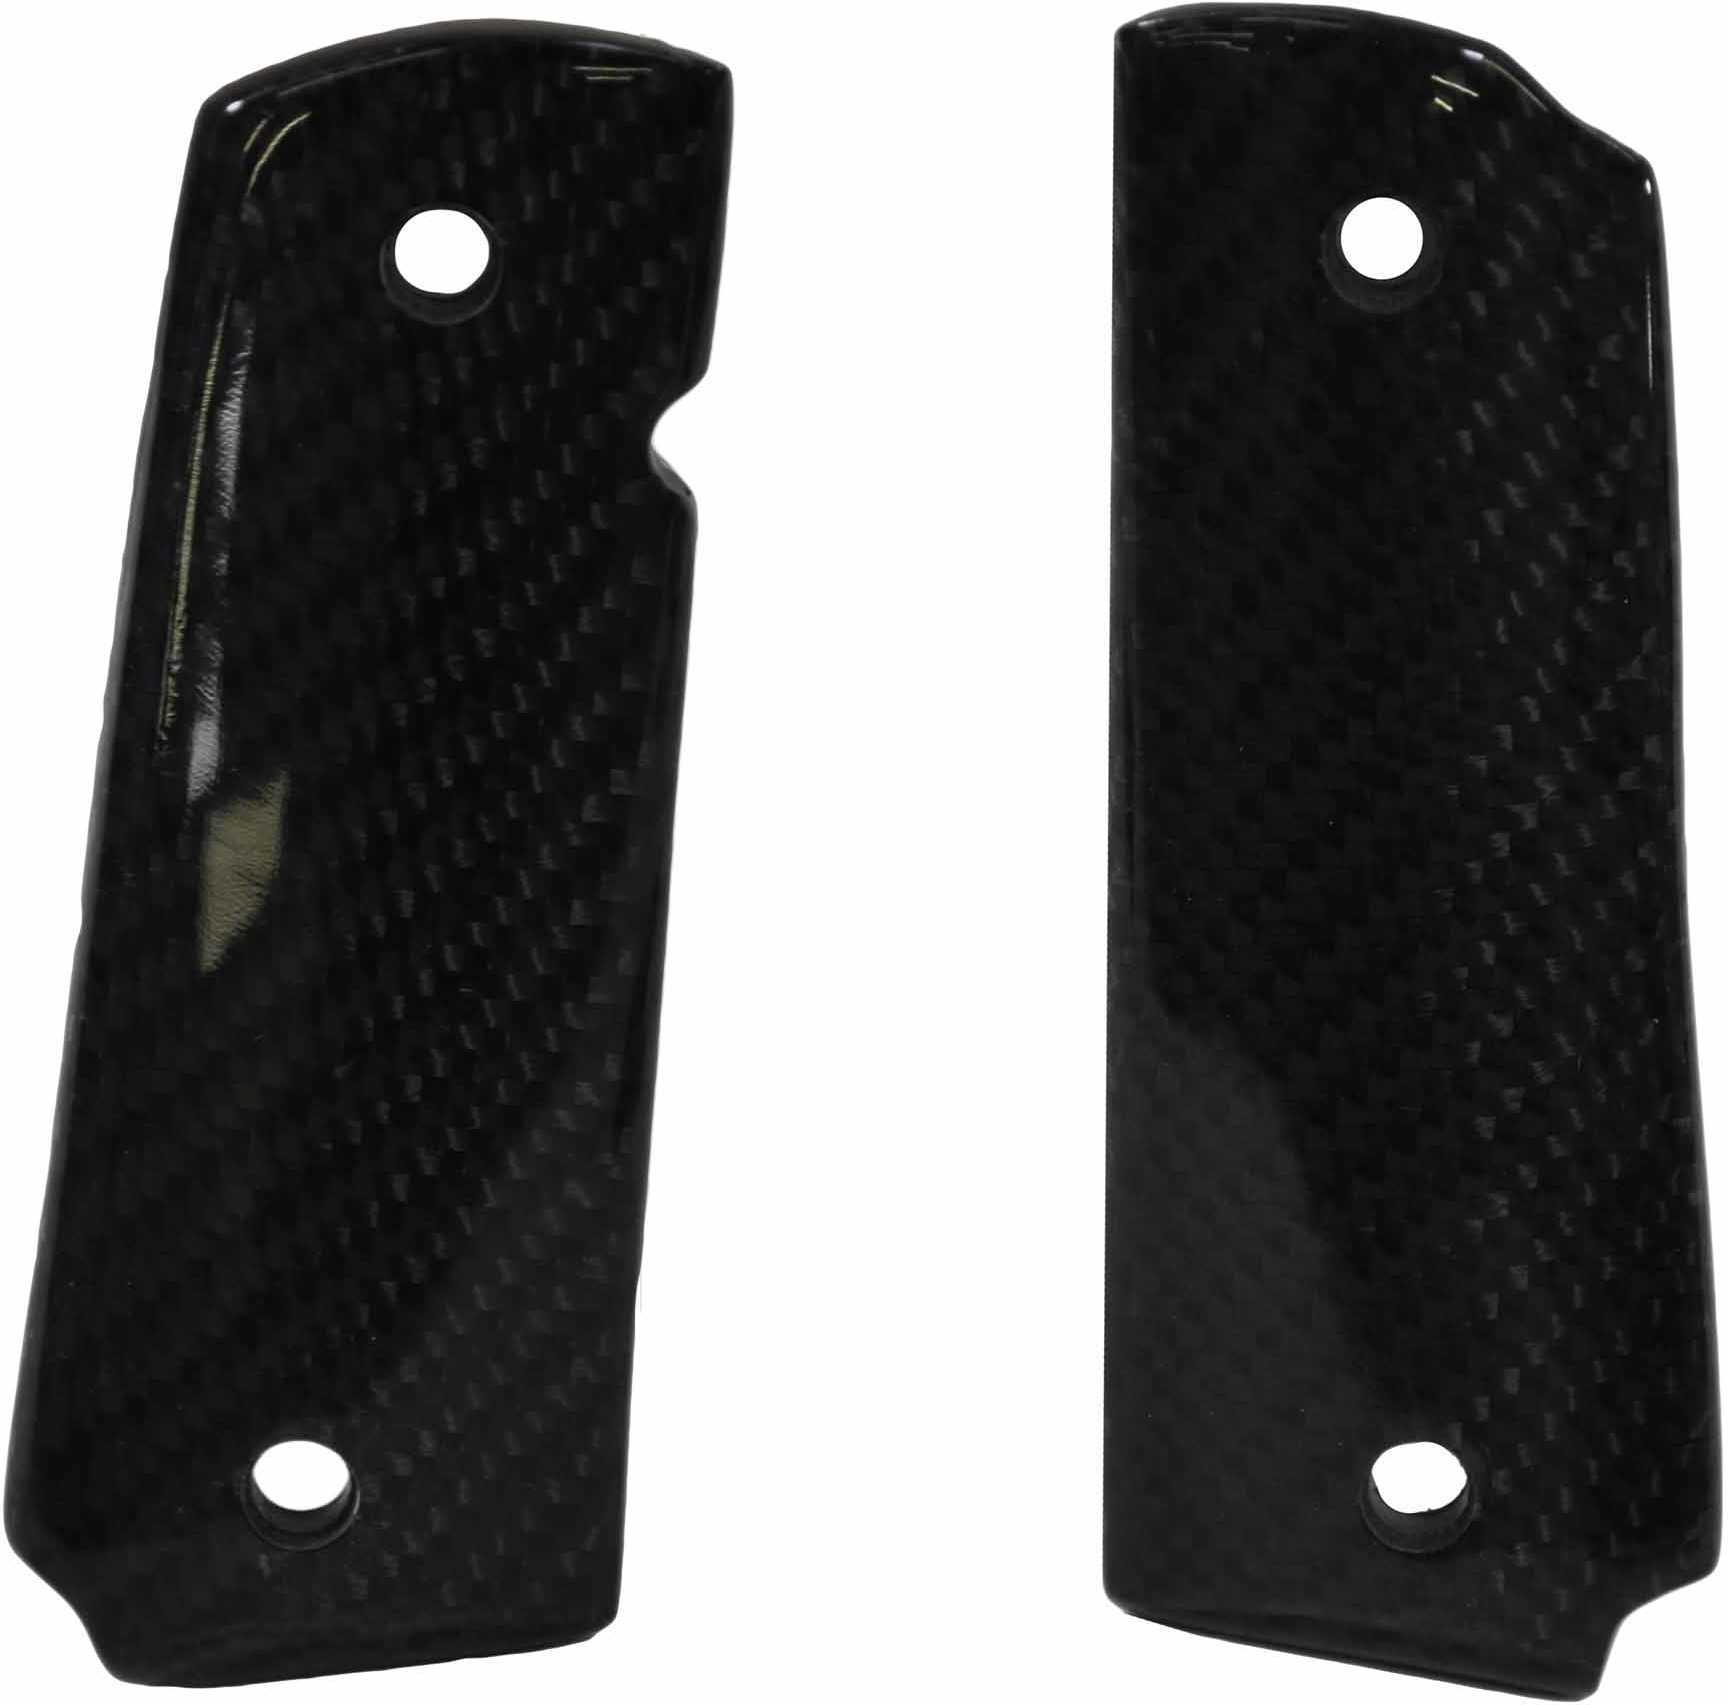 Pachmayr Carbon Fiber Grips For 1911 Textured Black